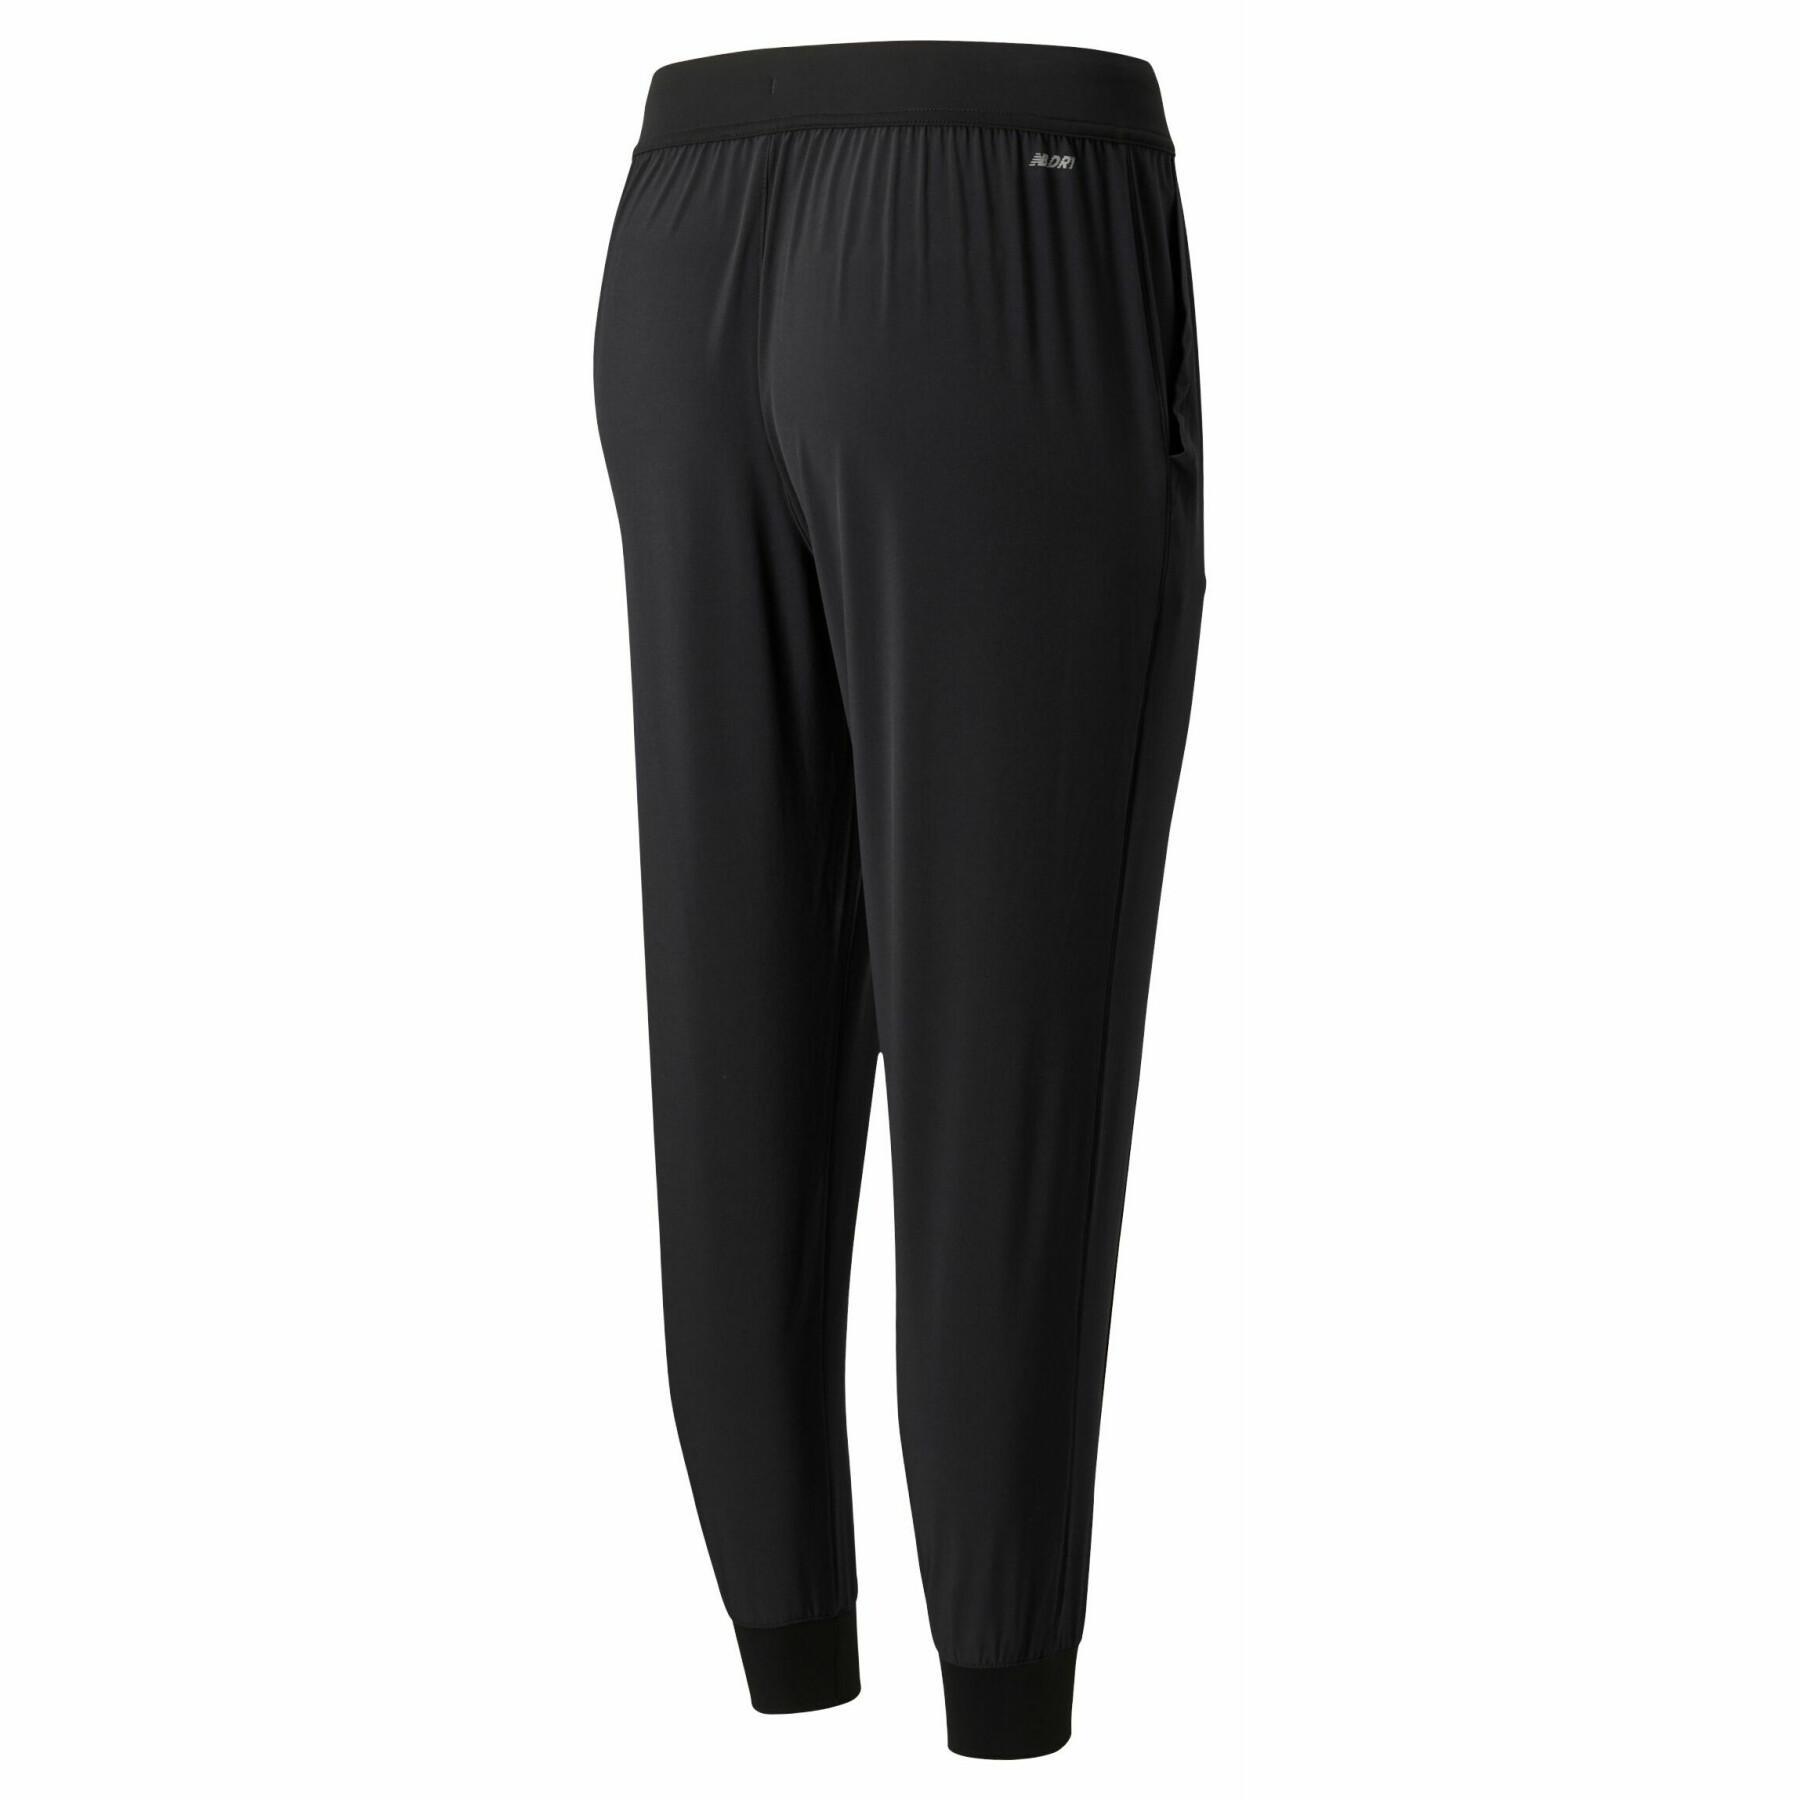 Women's trousers New Balance alons accelerate